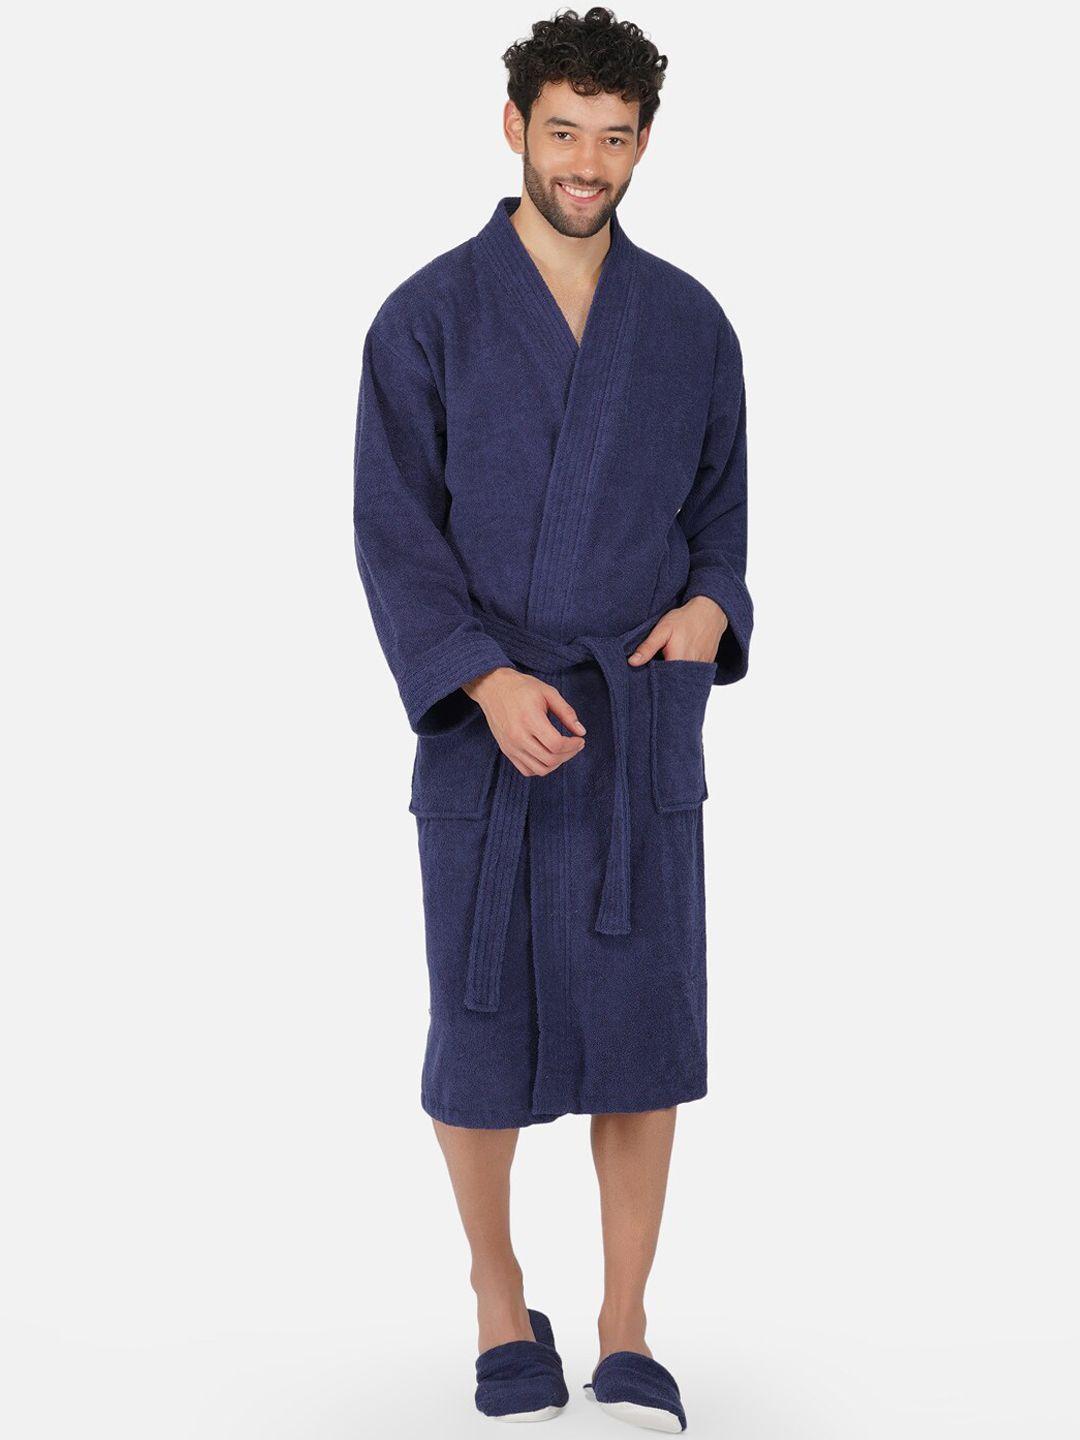 rangoli unisex navy blue pure cotton 400 gsm large bath robe with slippers